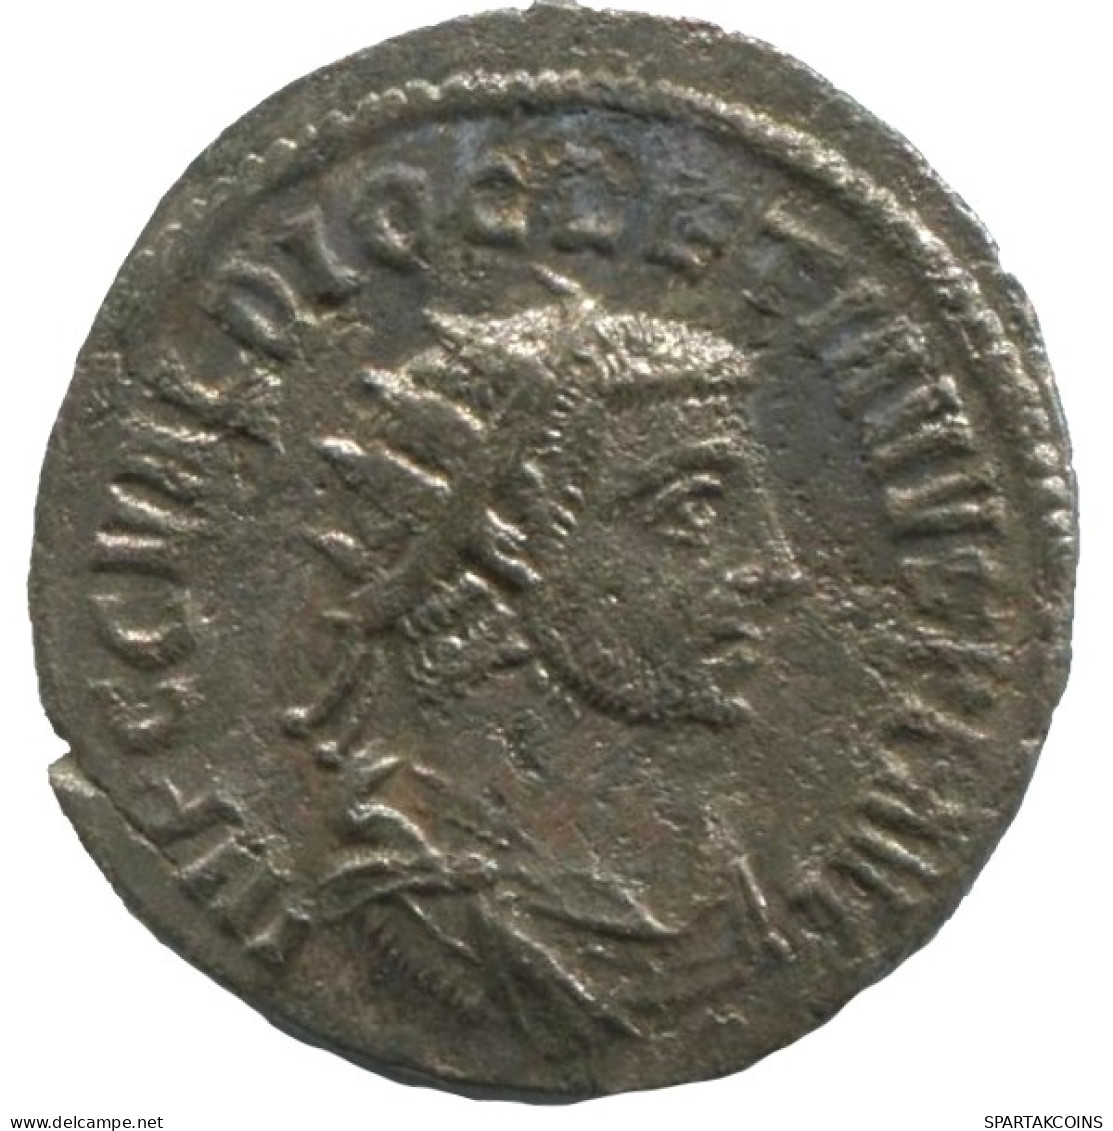 DIOCLETIAN ANTONINIANUS Antioch (? A/XXI) AD293 IOVETHERCVCONSER. #ANT1868.48.F.A - The Tetrarchy (284 AD Tot 307 AD)